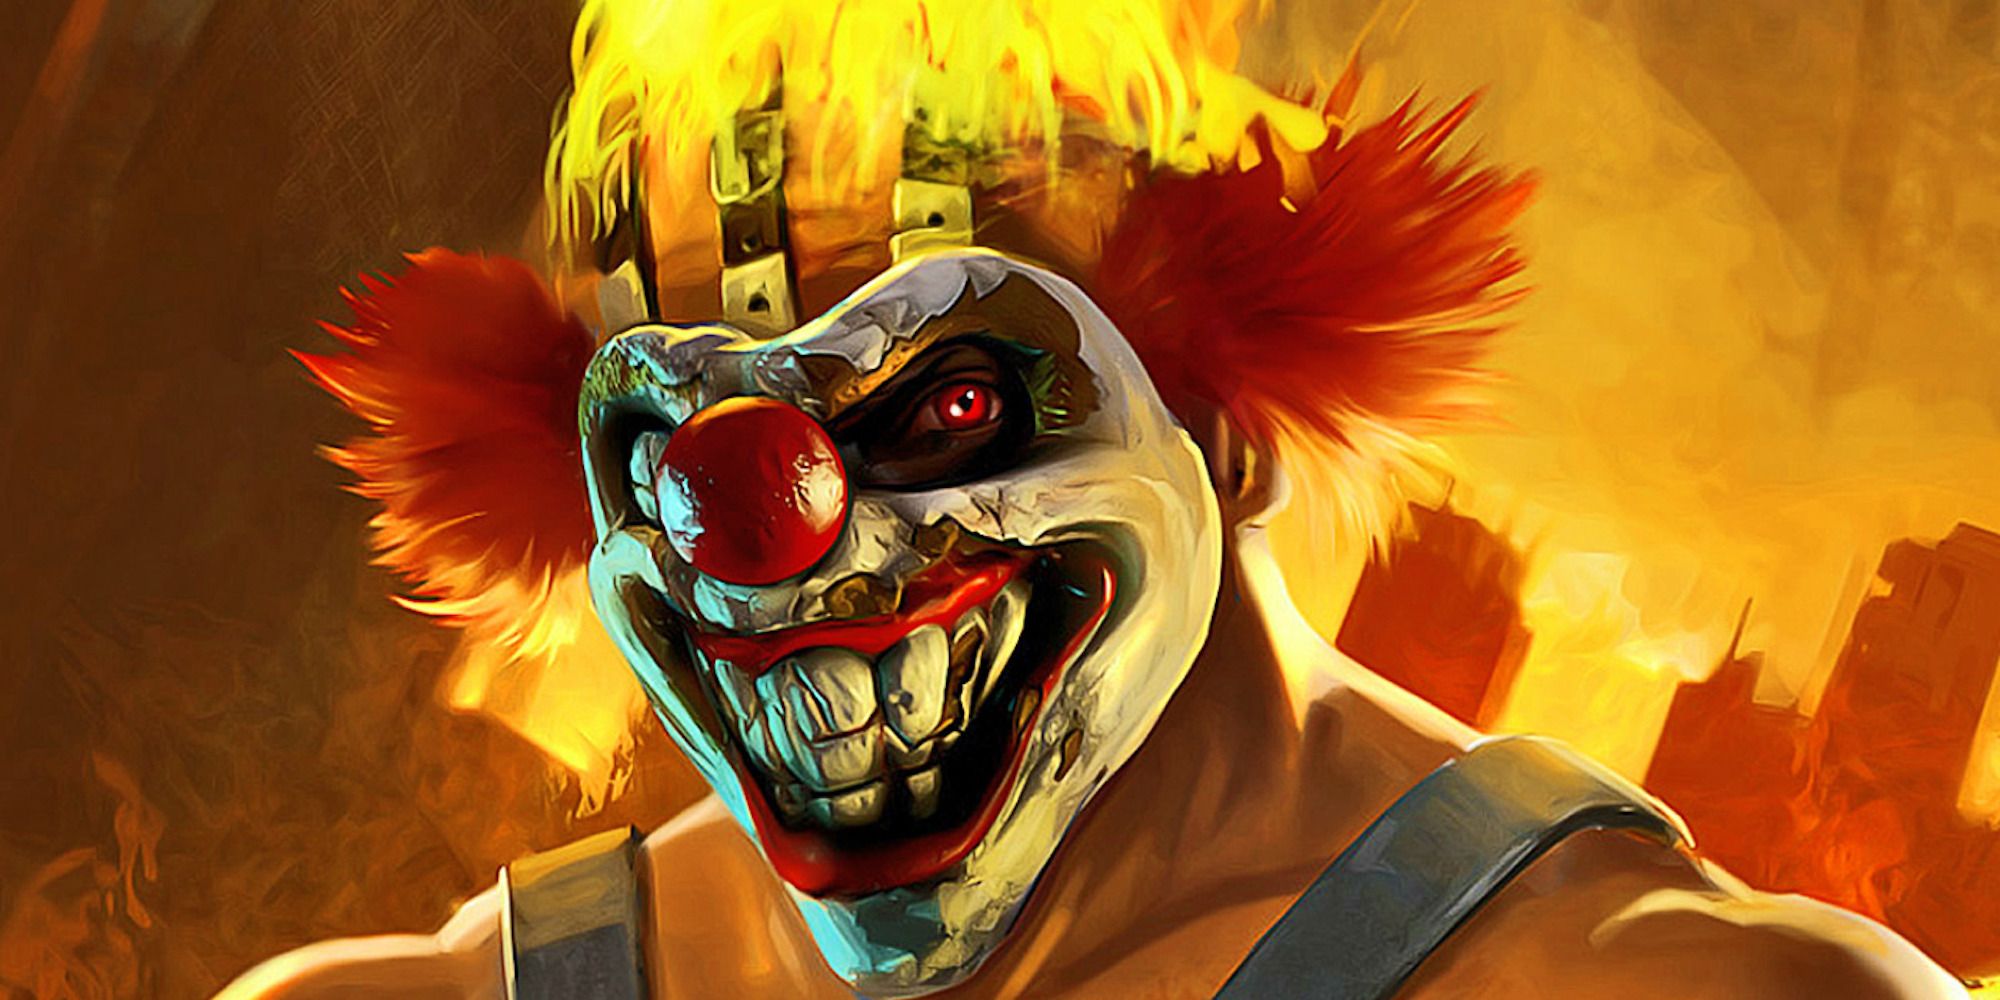 Sweet Tooth from Twisted Metal 